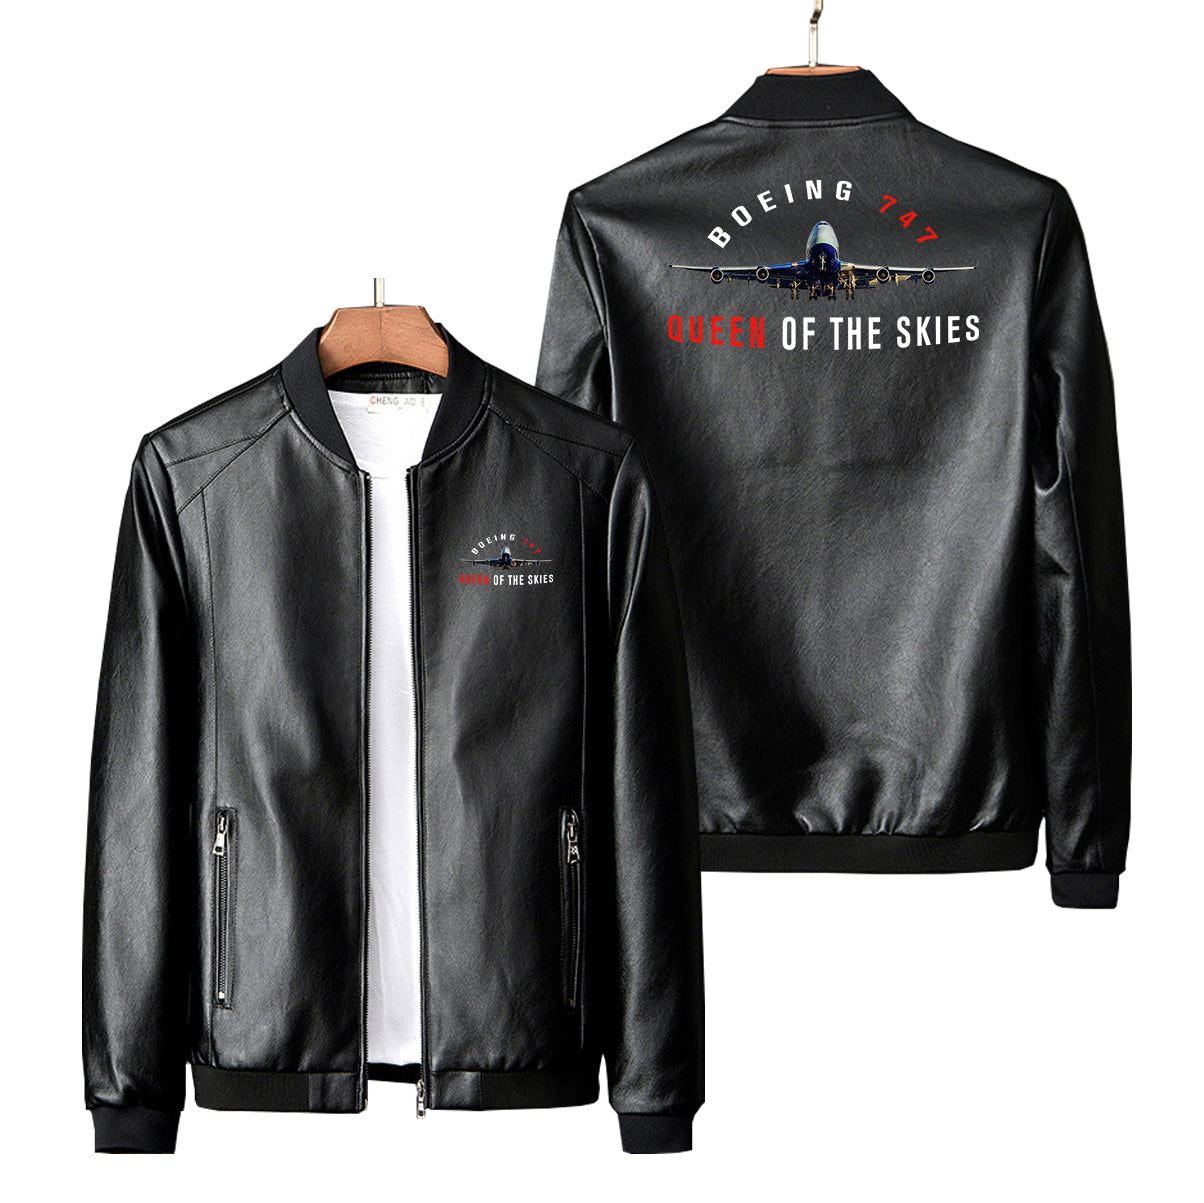 Boeing 747 Queen of the Skies Designed PU Leather Jackets